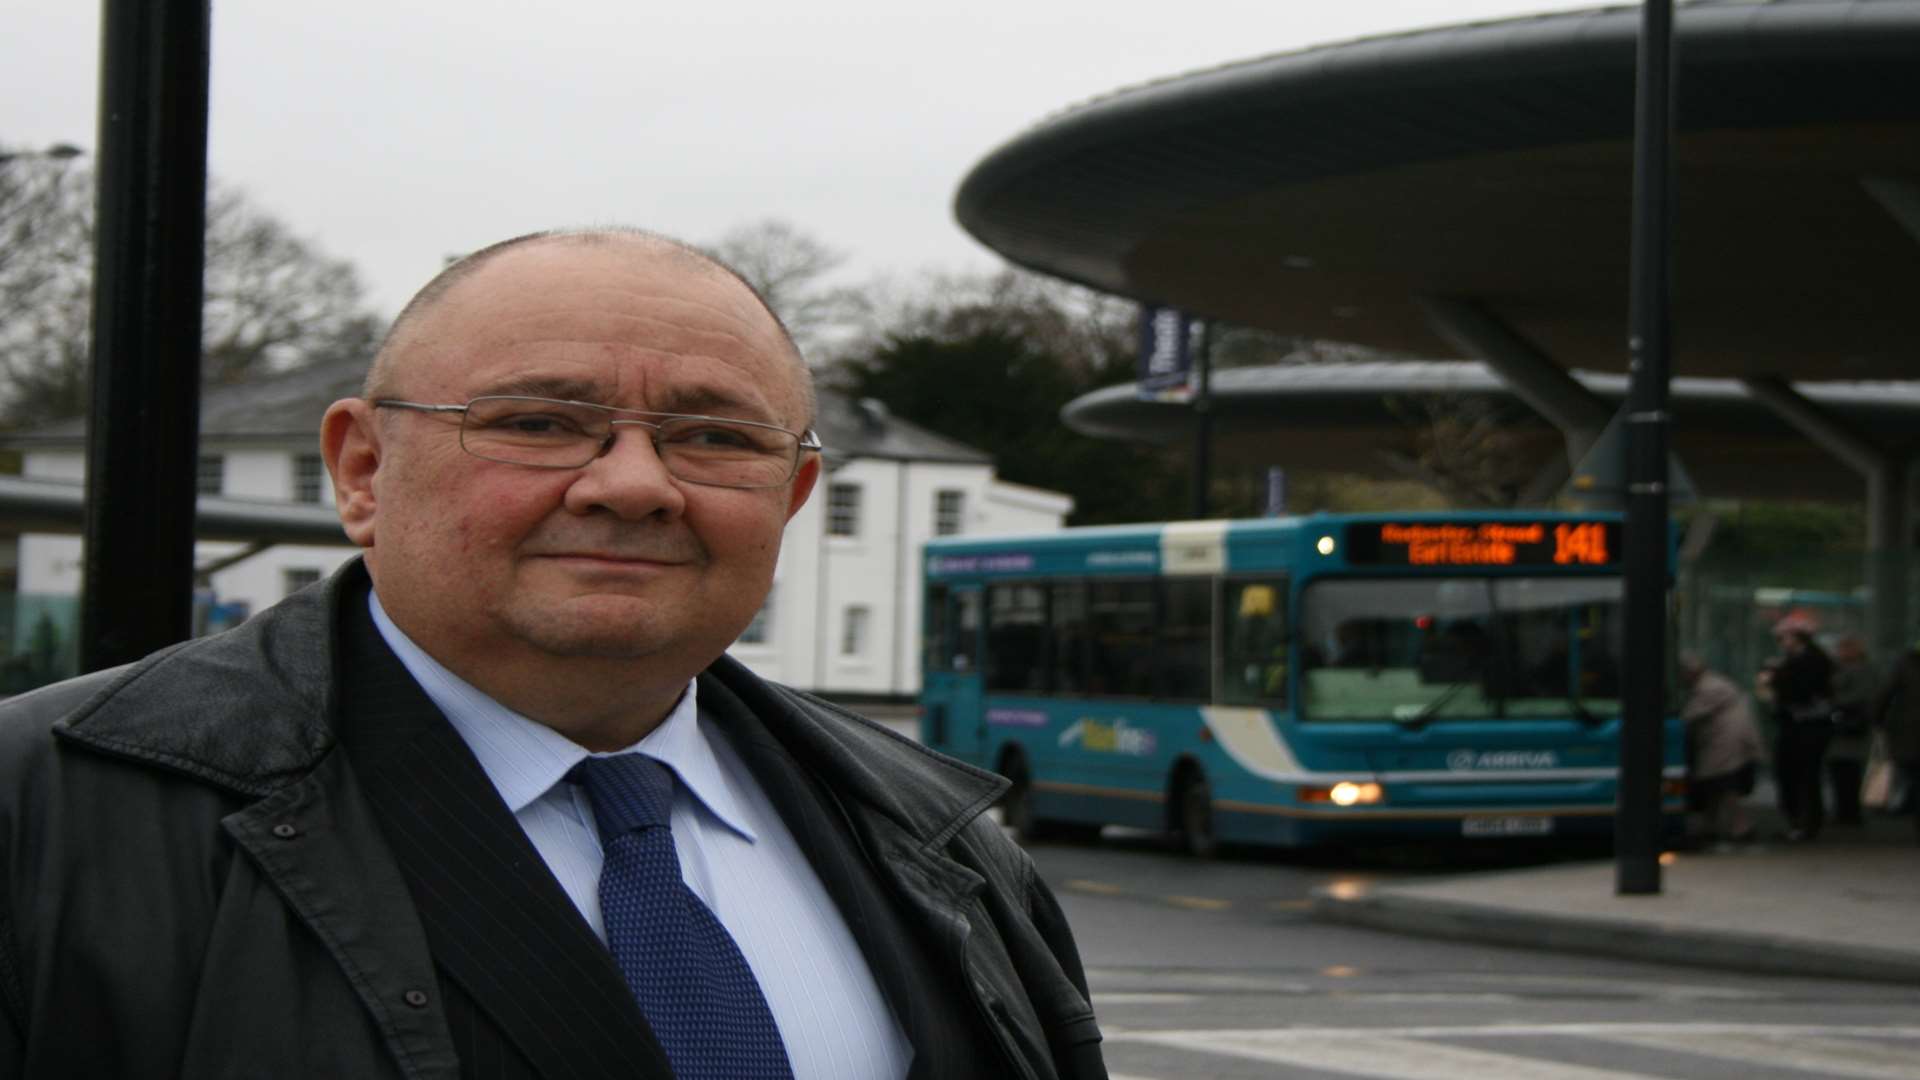 Andy McGrath, Medway Council's assistant director for frontline services, at the Chatham bus station